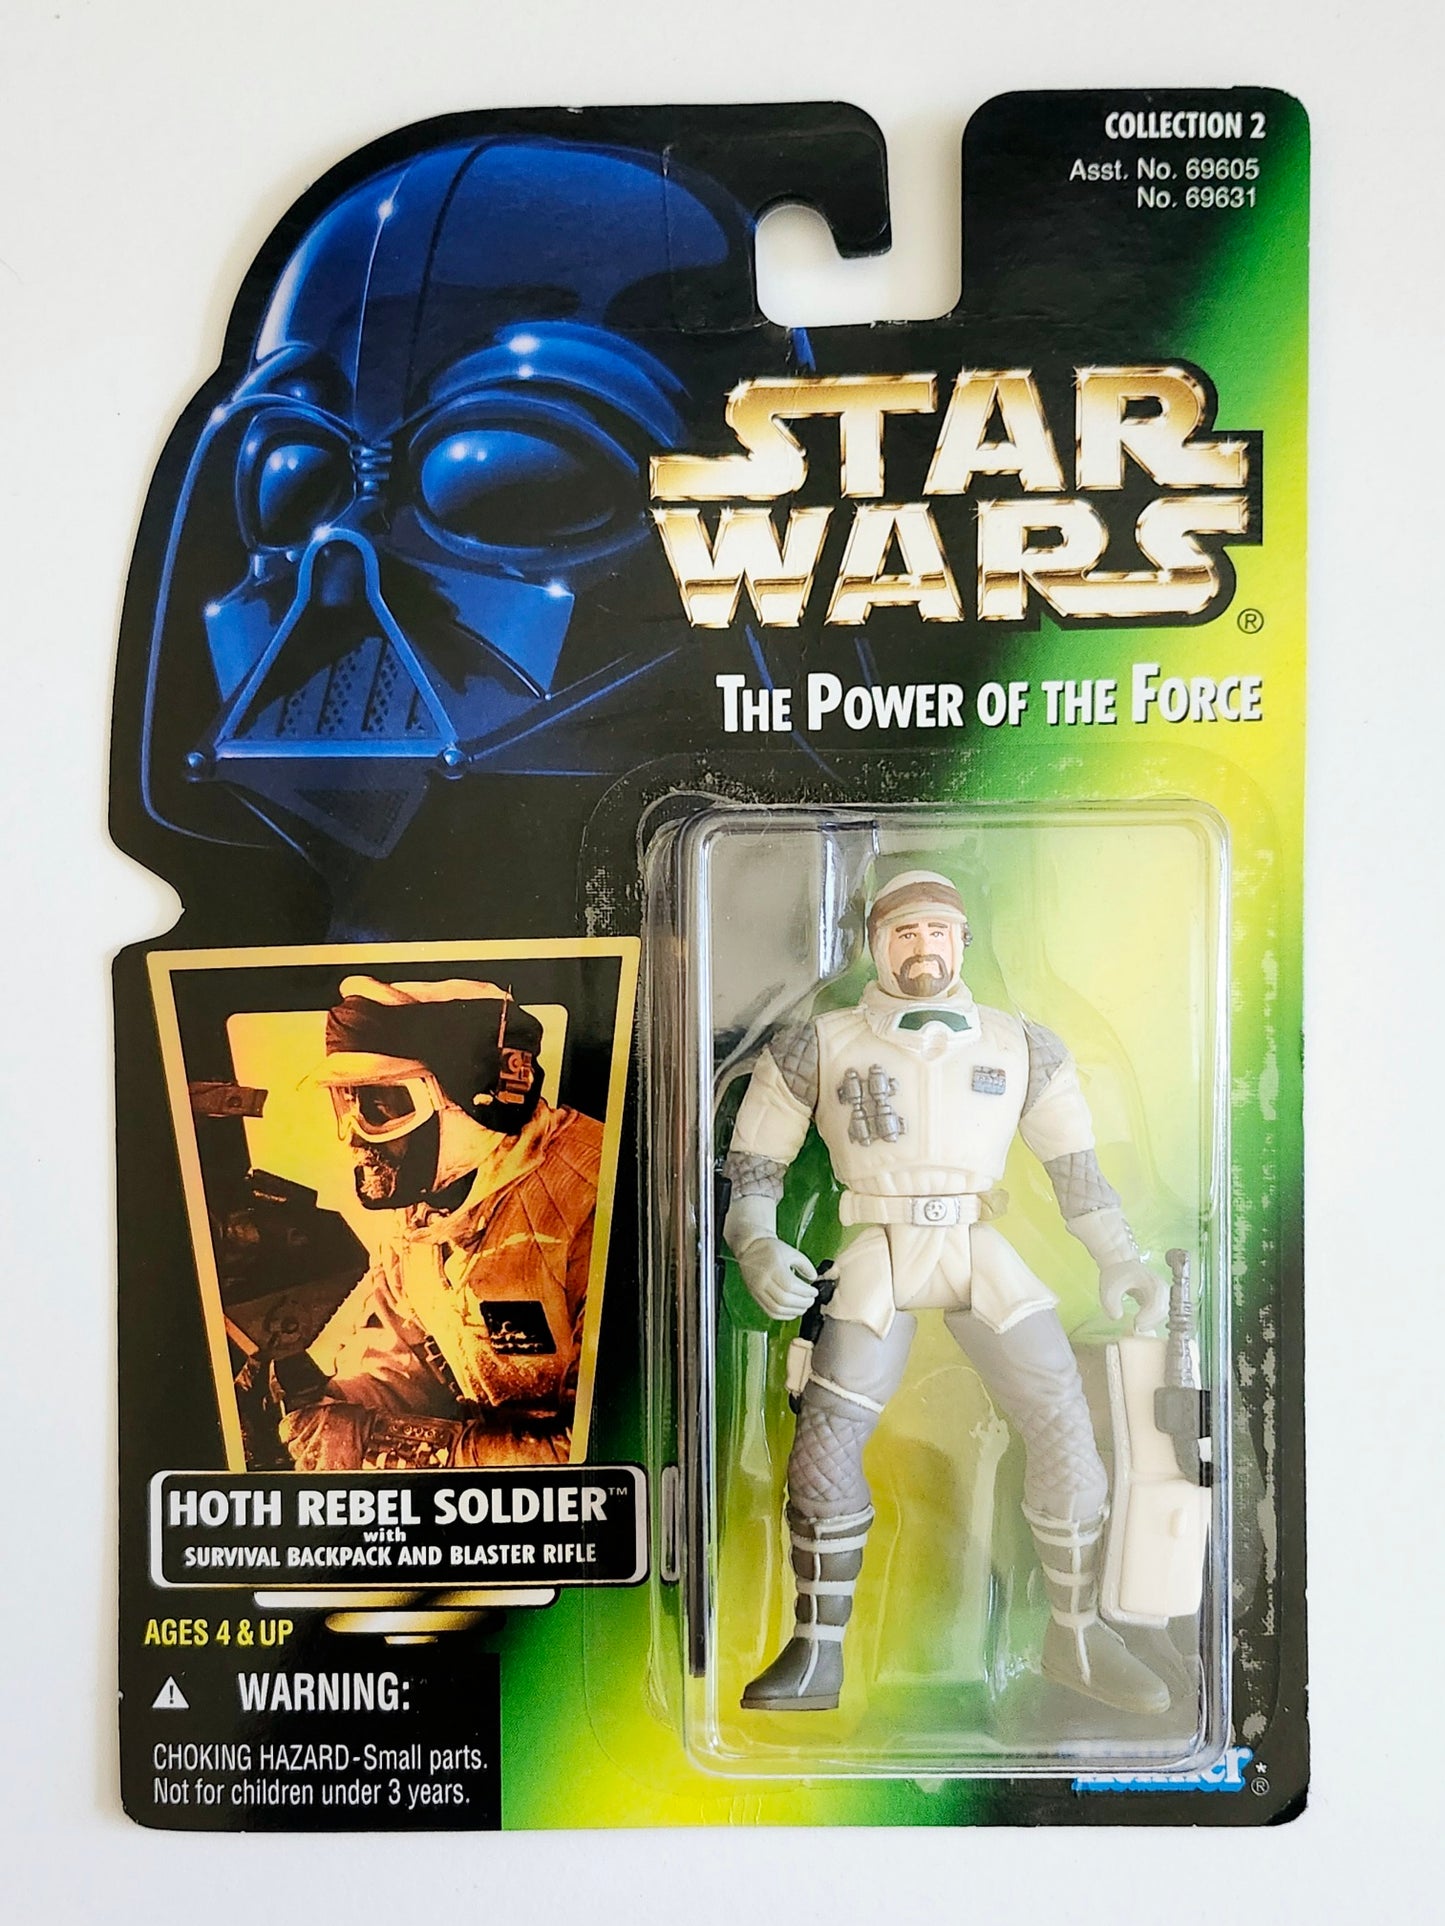 Star Wars: Power of the Force Hoth Rebel Soldier (Hologram Card) 3.75-Inch Action Figure